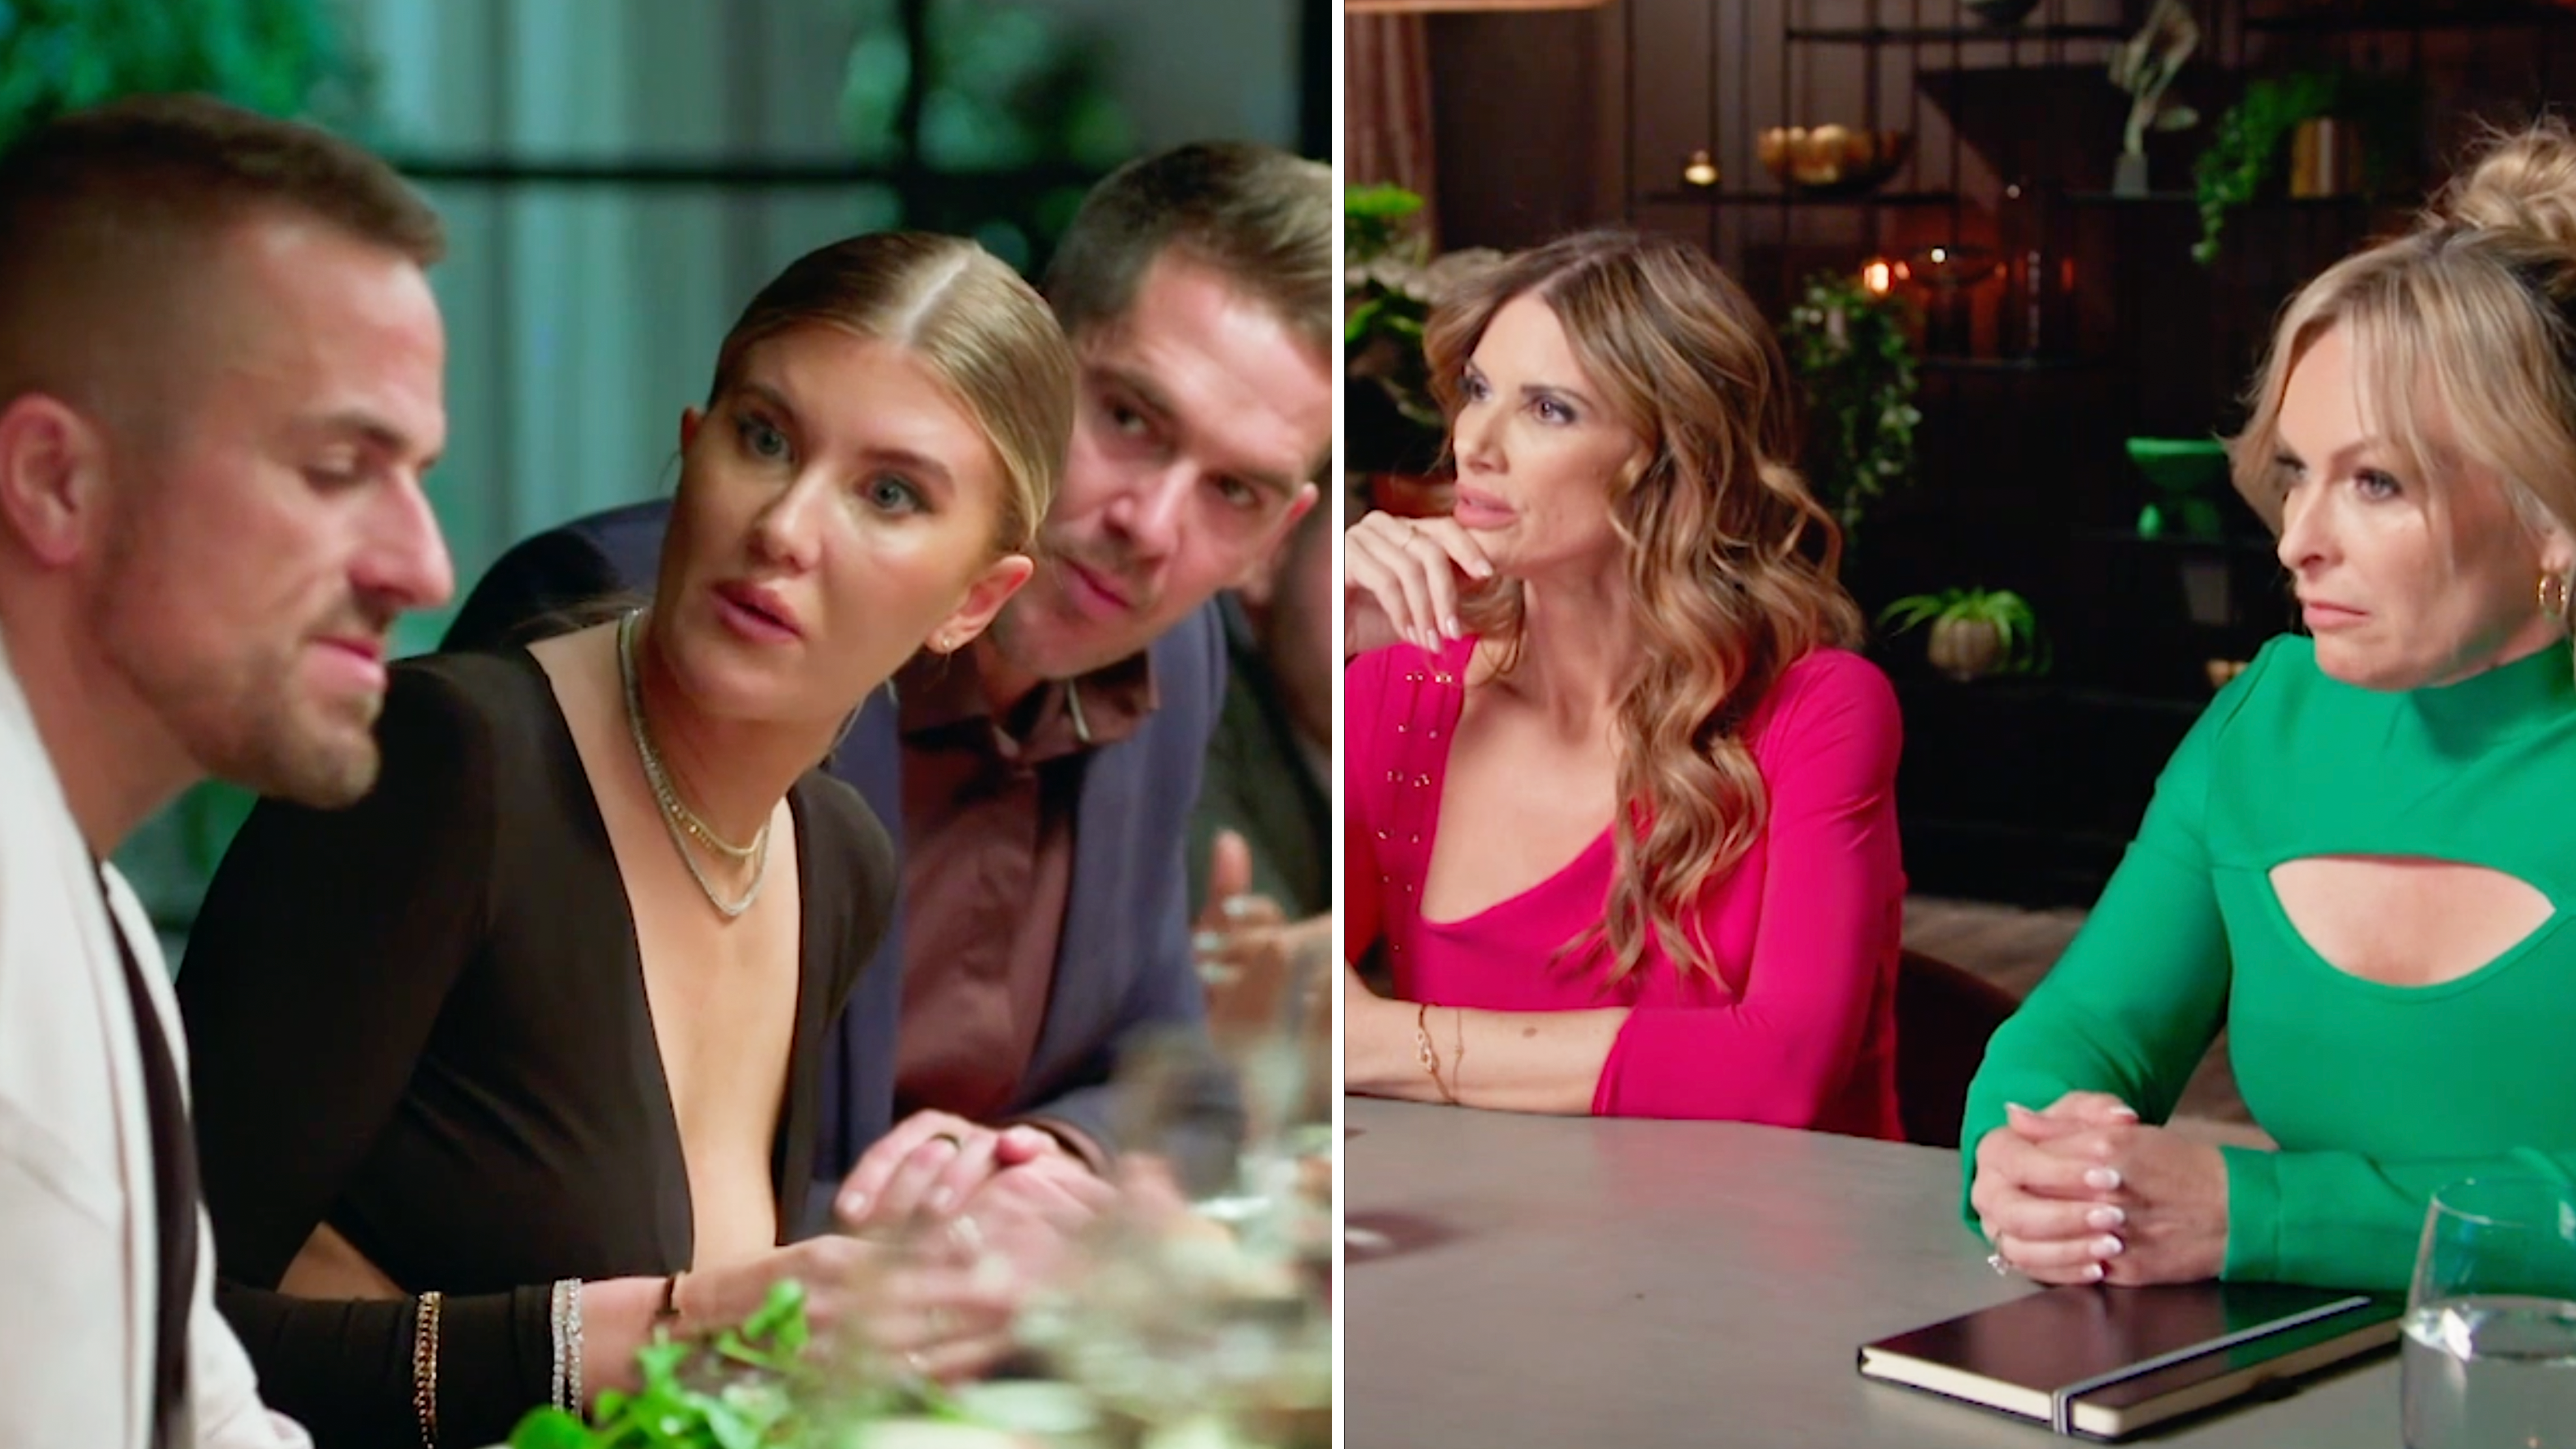 Episode 12 Recap: Sara and Tim explode at the Dinner Party while Tory and Timothy clash